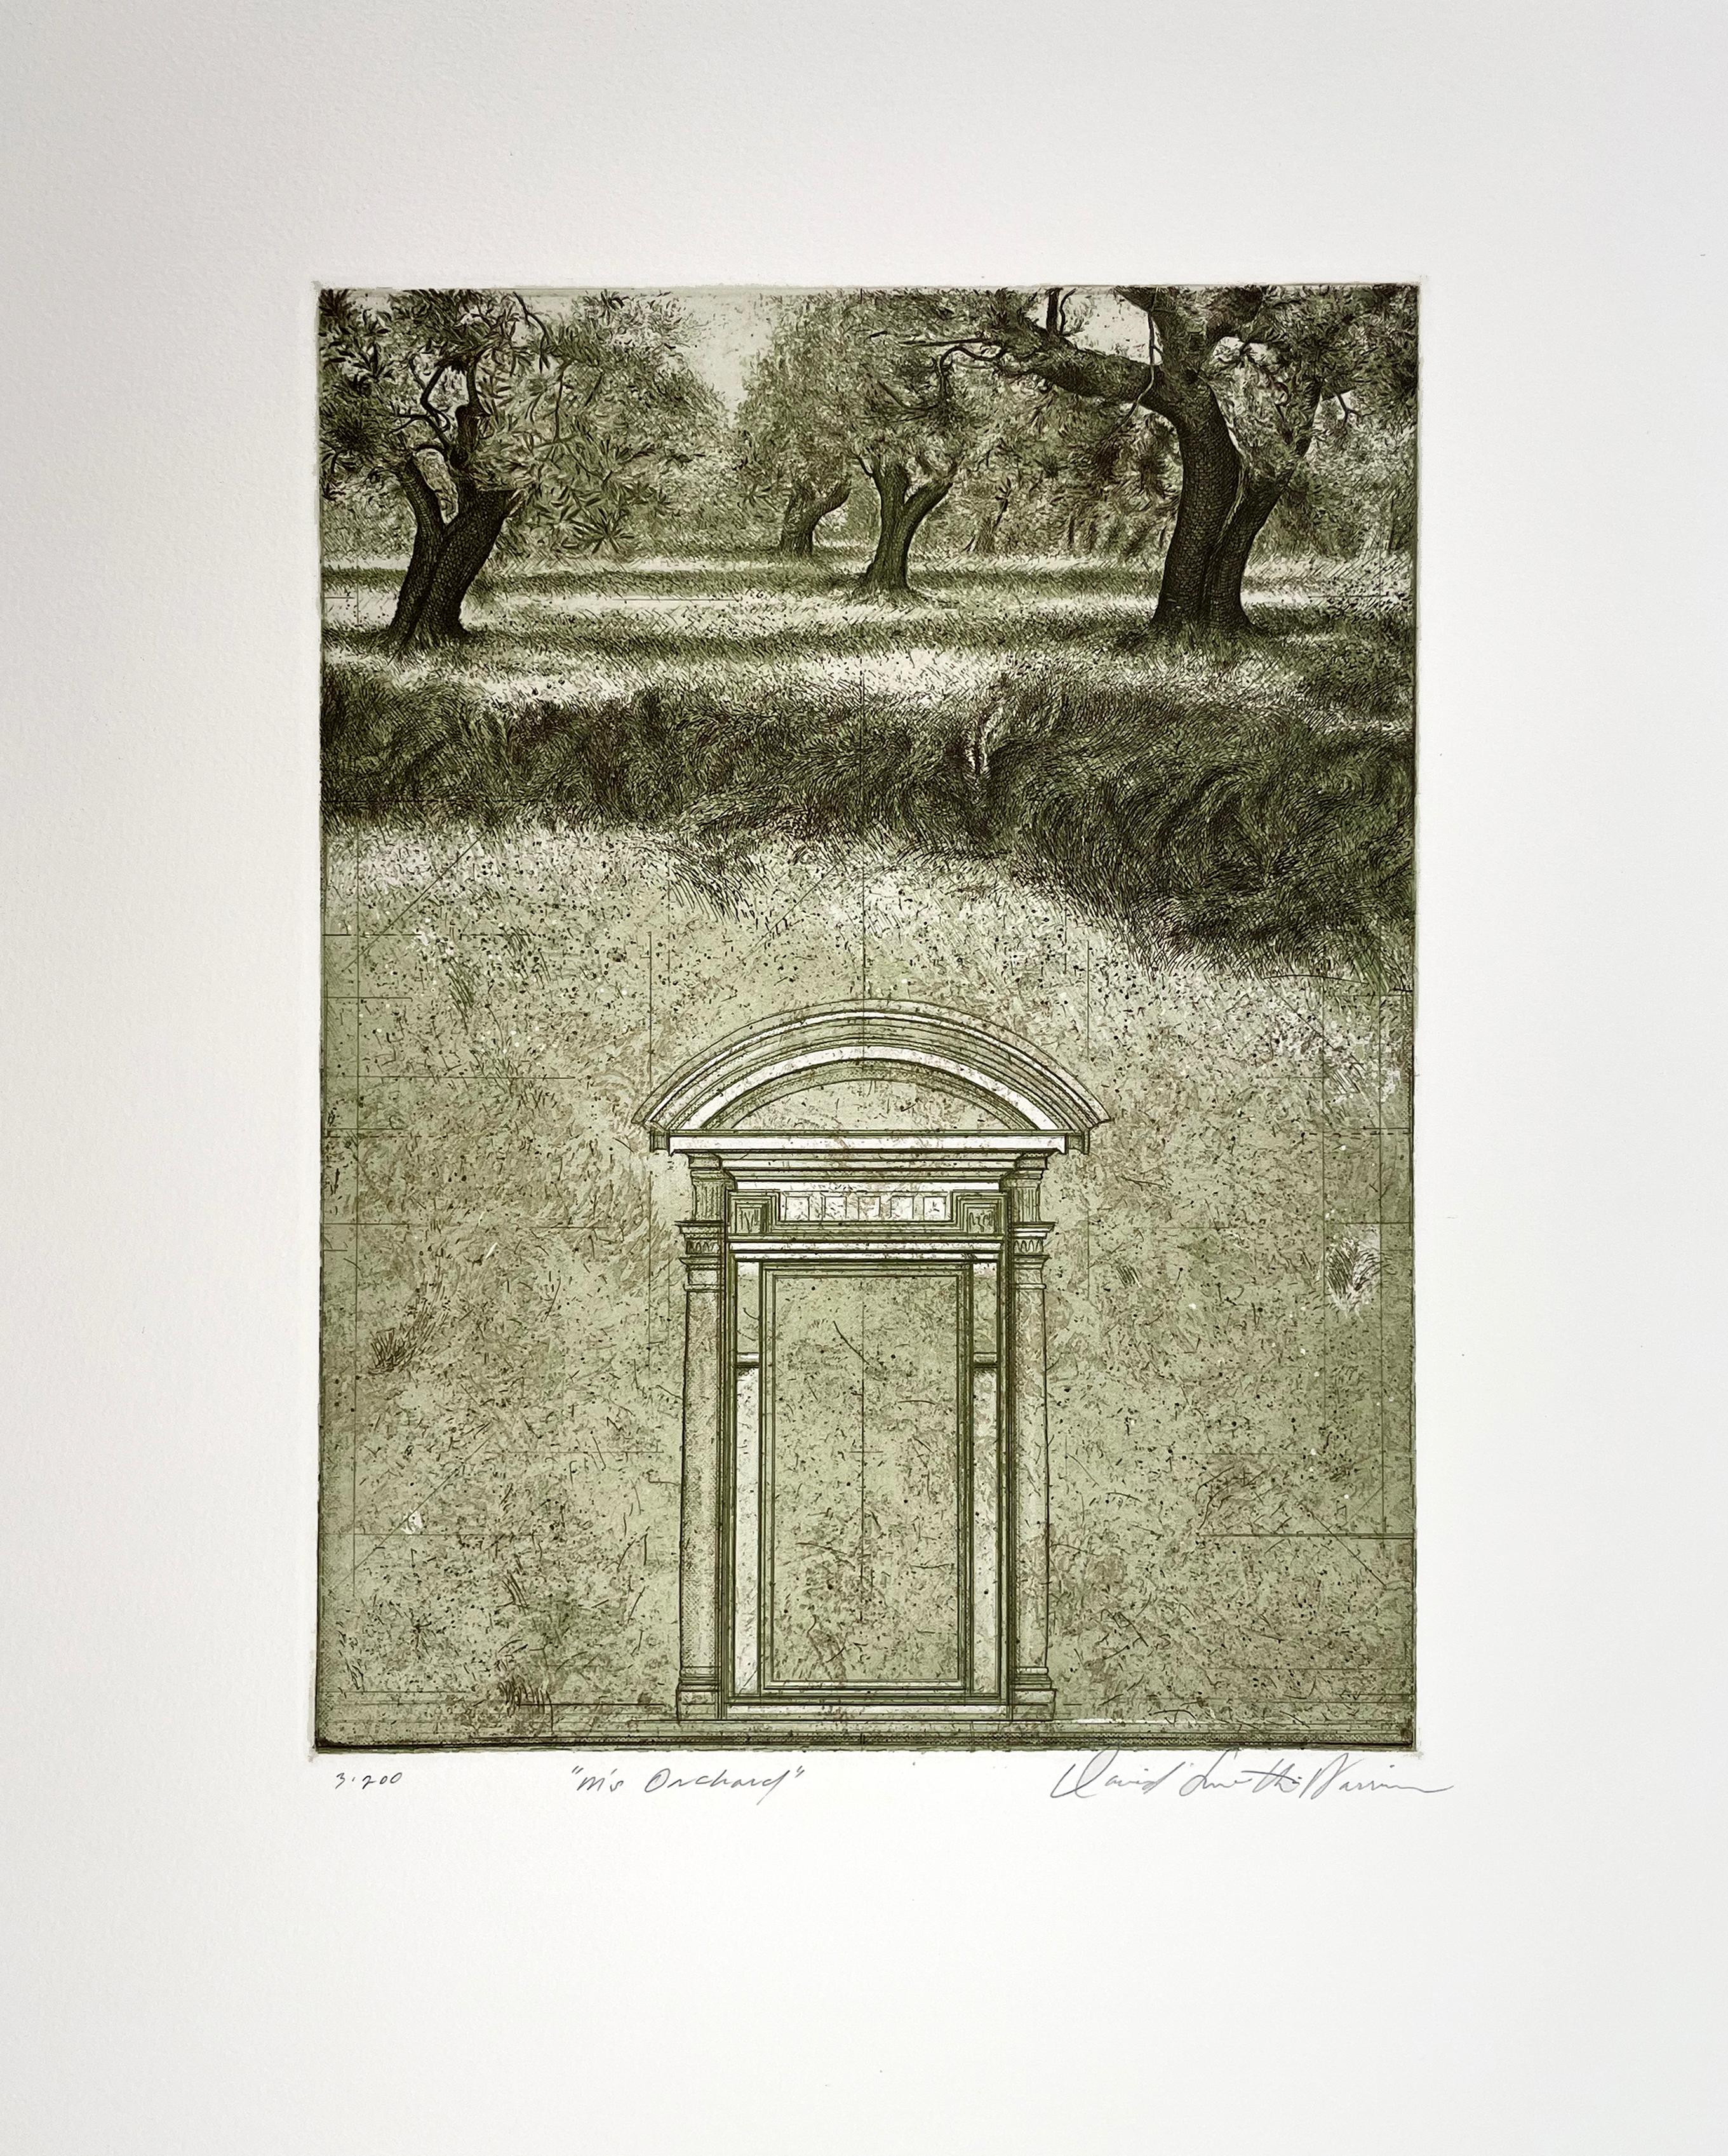 Signed, titled and numbered by the artist.  This intaglio print shows an orchard combined with the classical architectural imagery that often accompany Smith-Harrison's portraits of trees.

Smith-Harrison is known for his meticulous depictions of